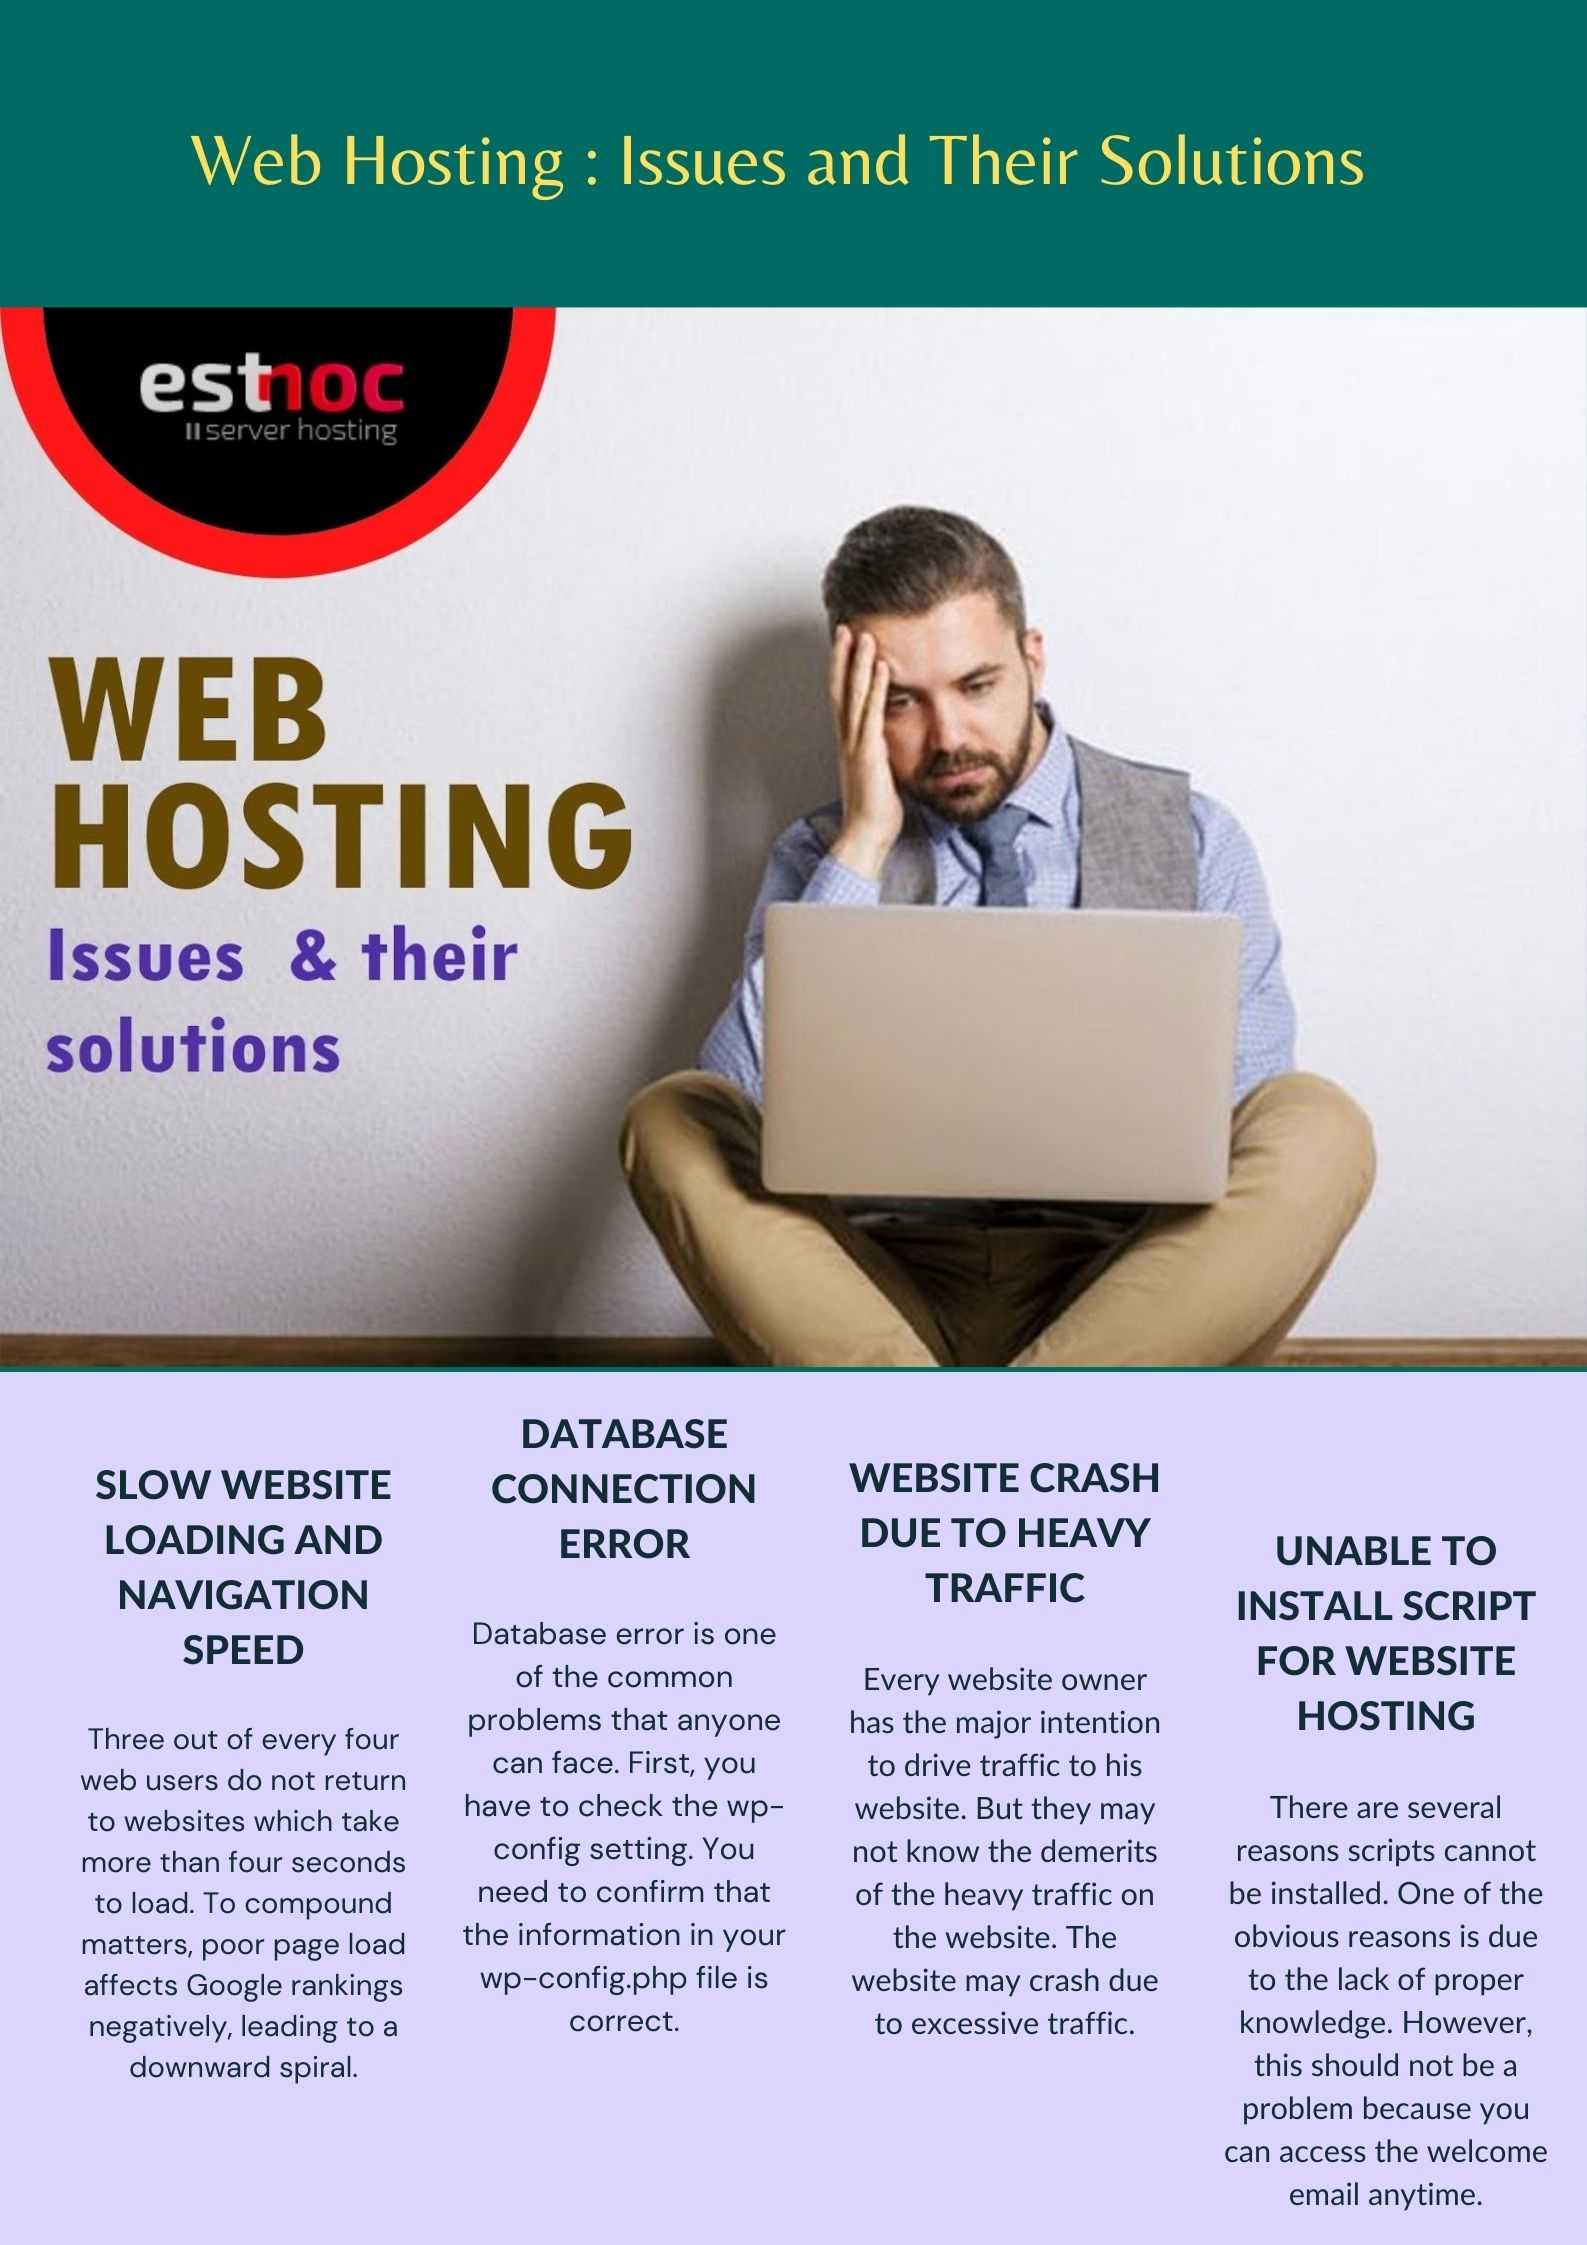 Web Hosting-Issues and Their Solutions.jpg  by estnoc